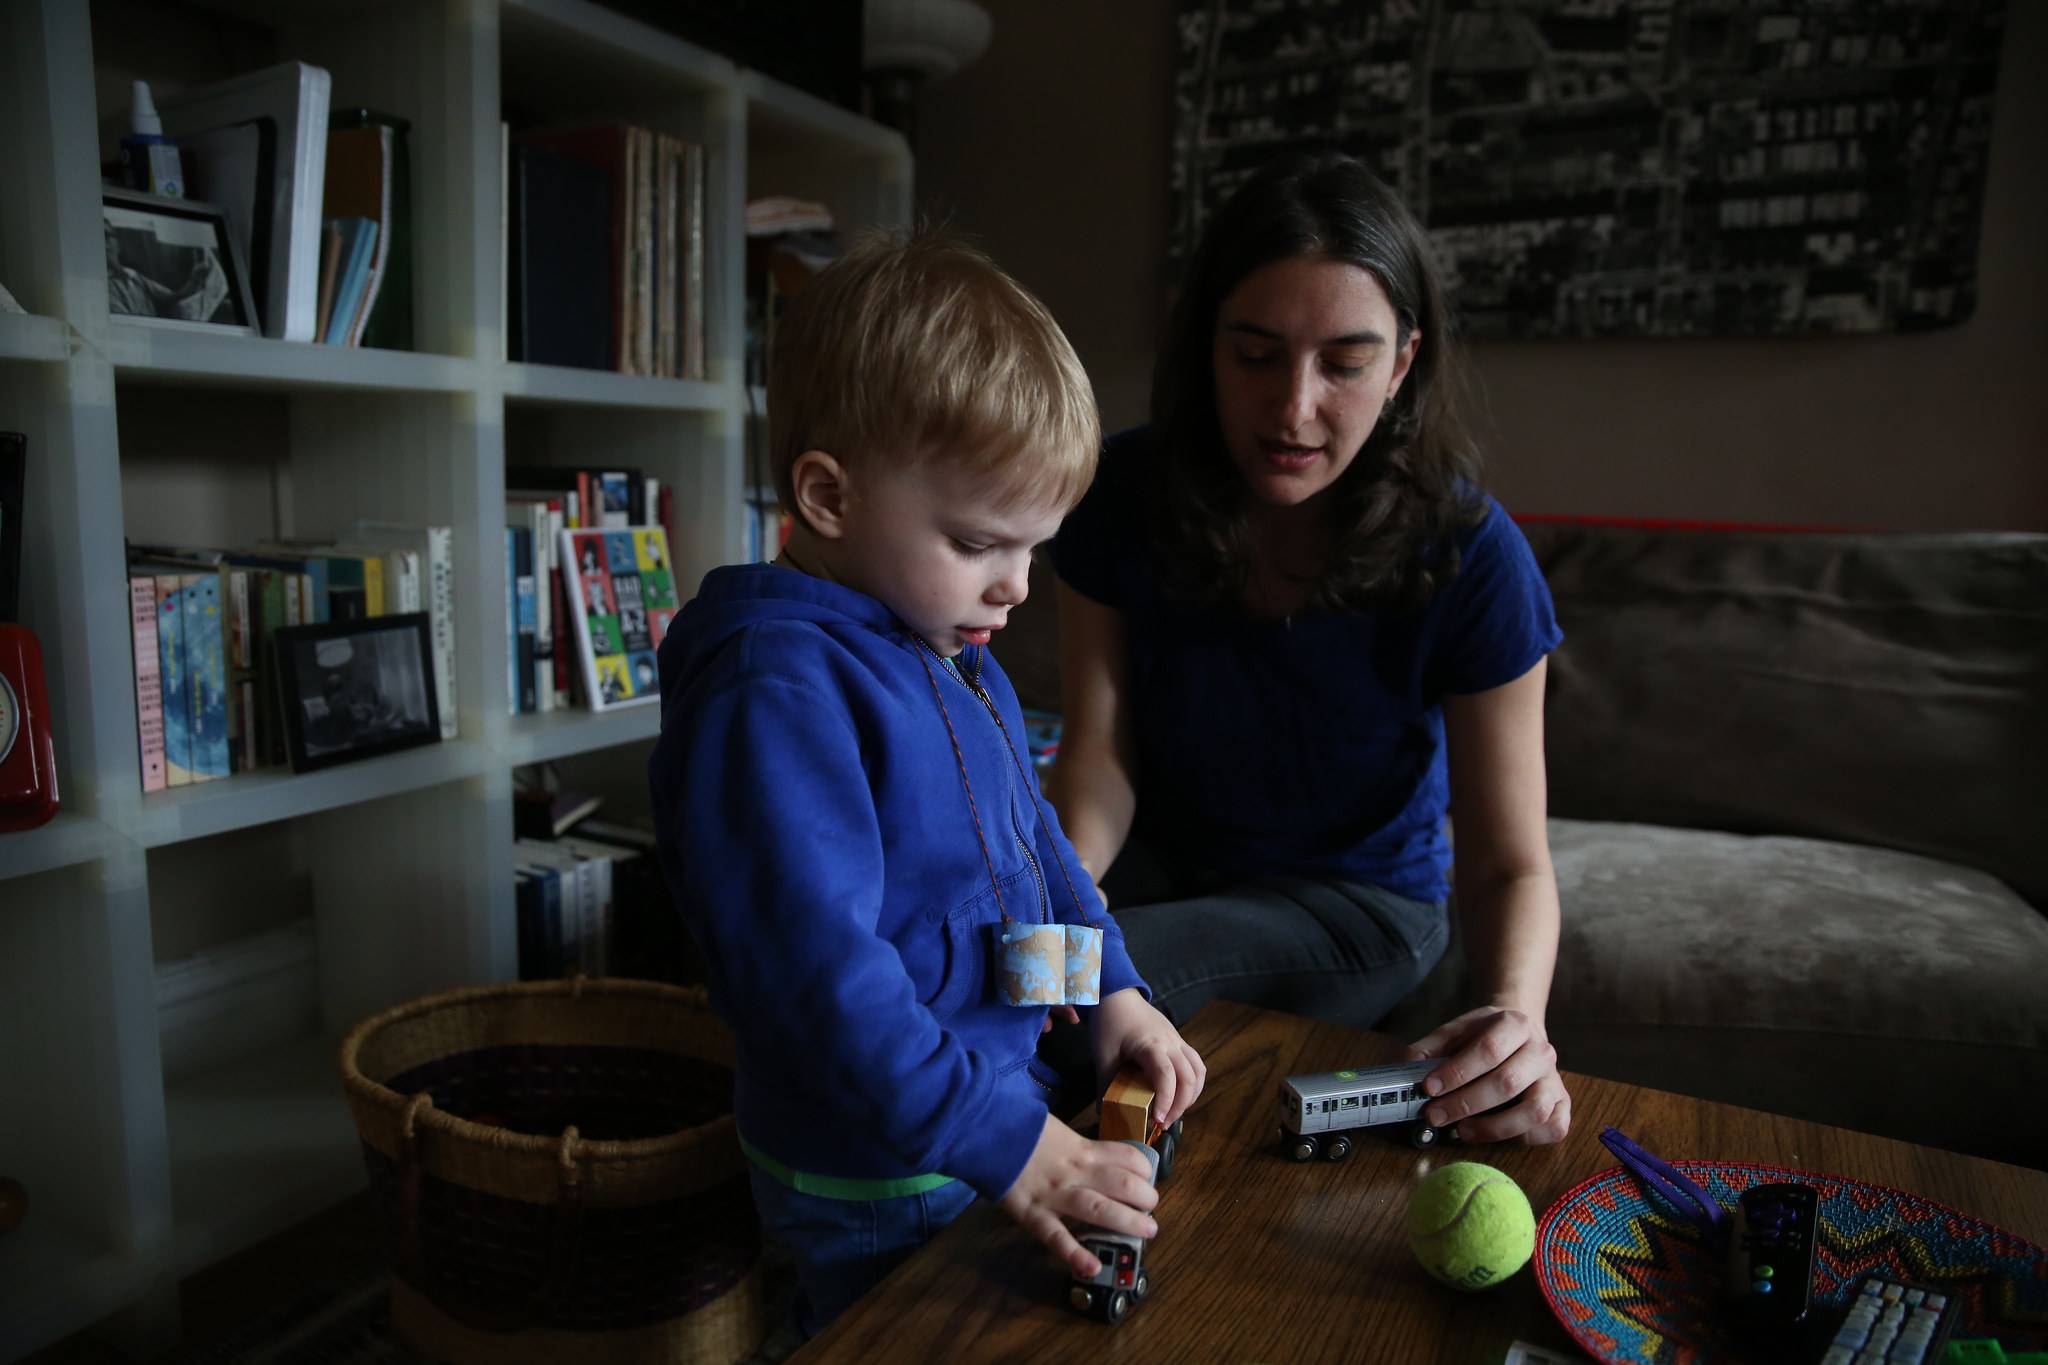 Echo Dot Kids Edition: safe learning with Amazon’s AI